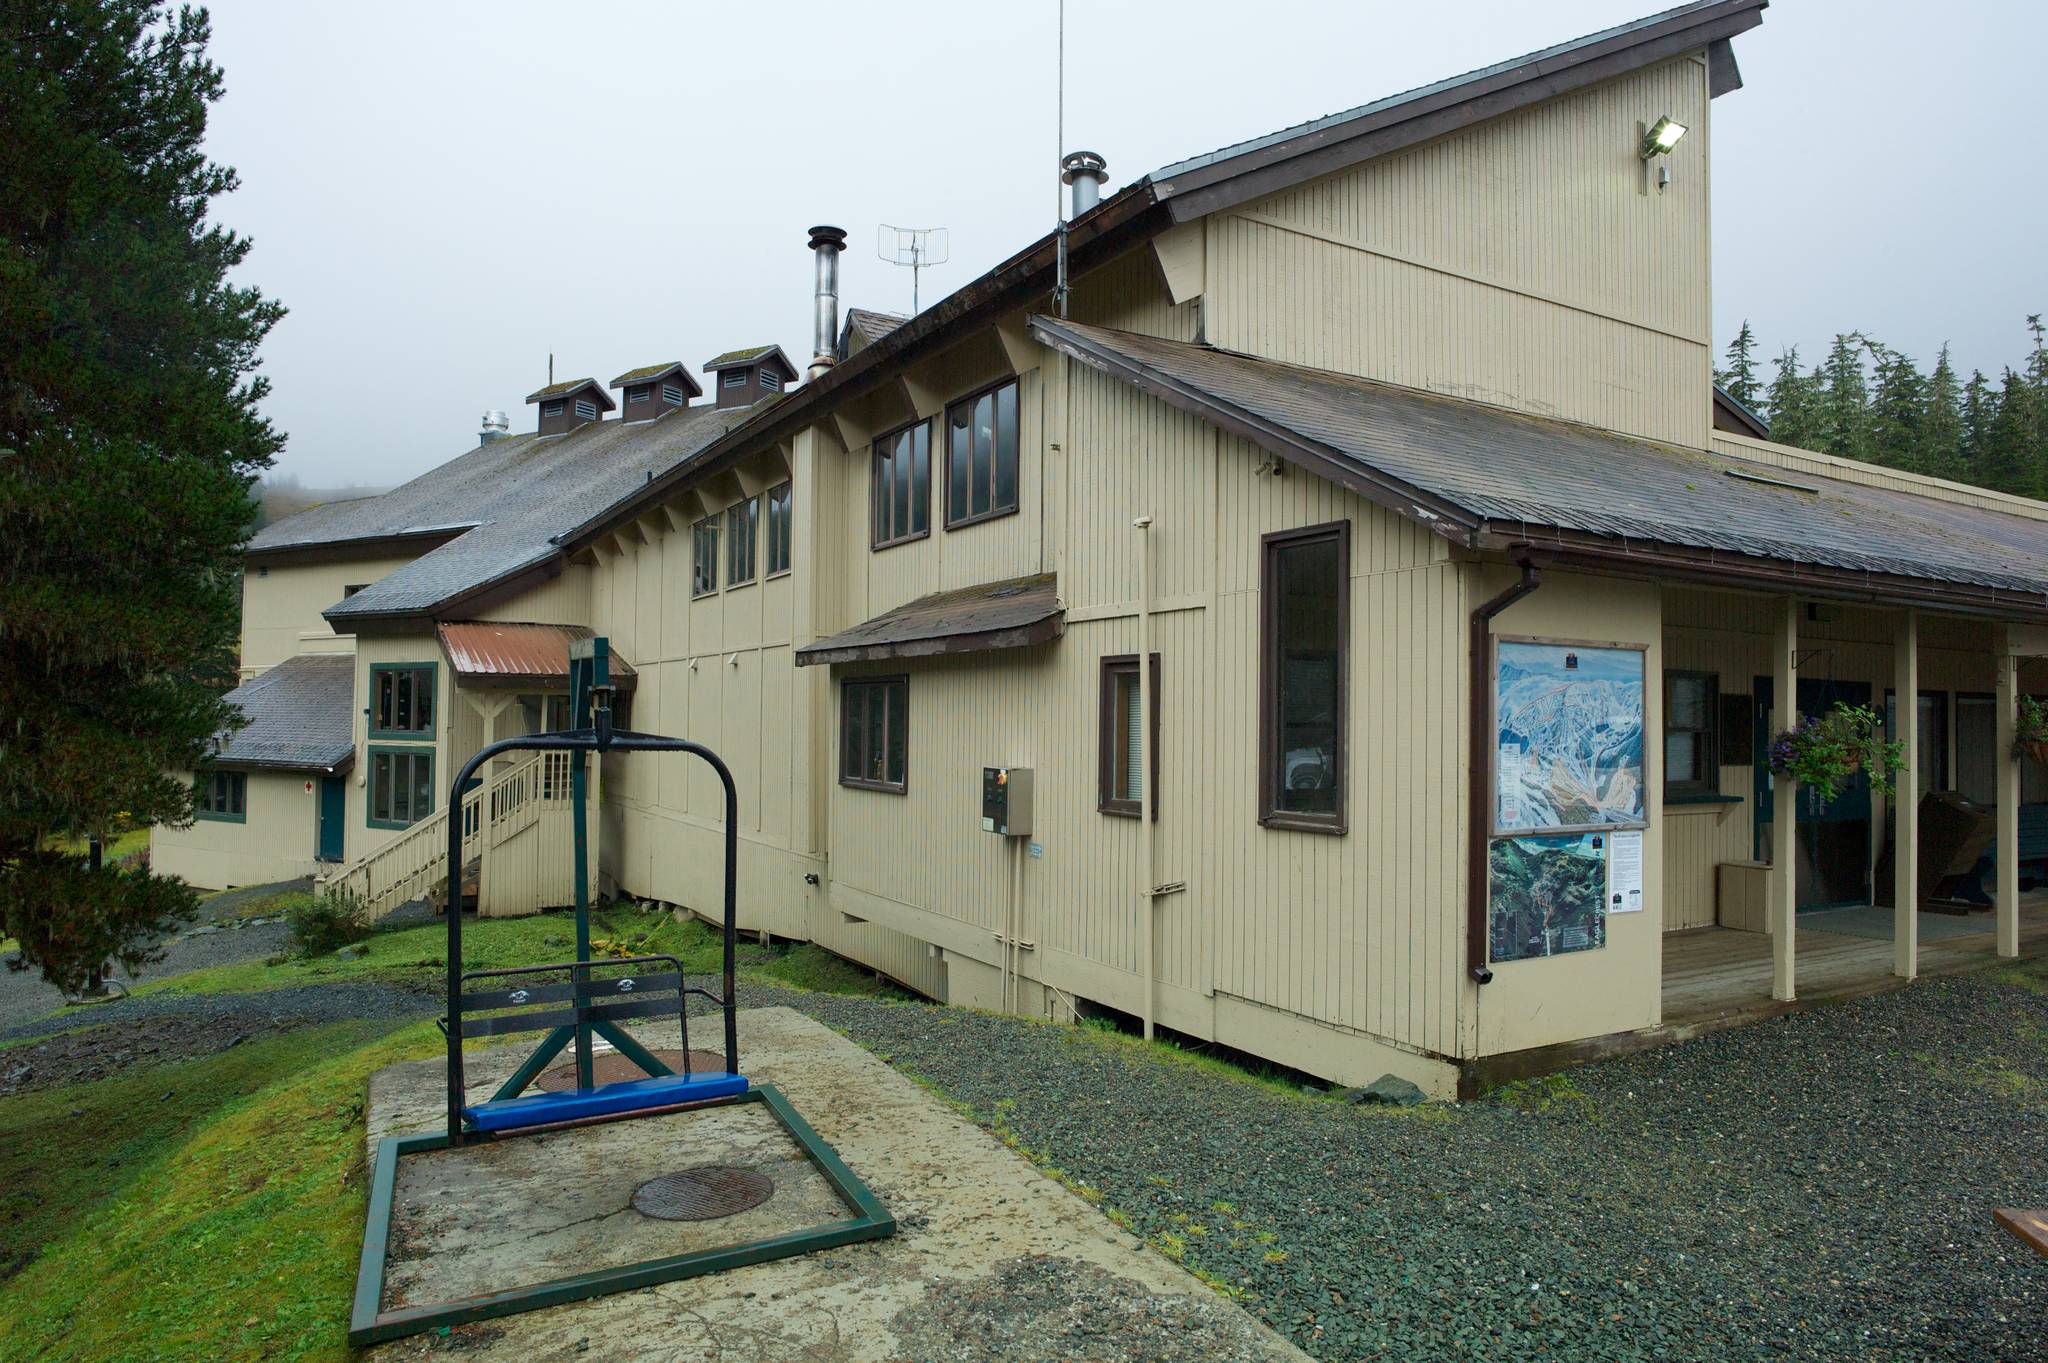 The Eaglecrest Ski Area lodge, seen here in 2015, is the planned site of the Old Tower Bar, which would serve beer and wine during ski season. In a unanimous vote Monday, Oct. 15, 2018, the Alcohol Control Board rejected an alcohol license for the business. (Michael Penn | Juneau Empire File)